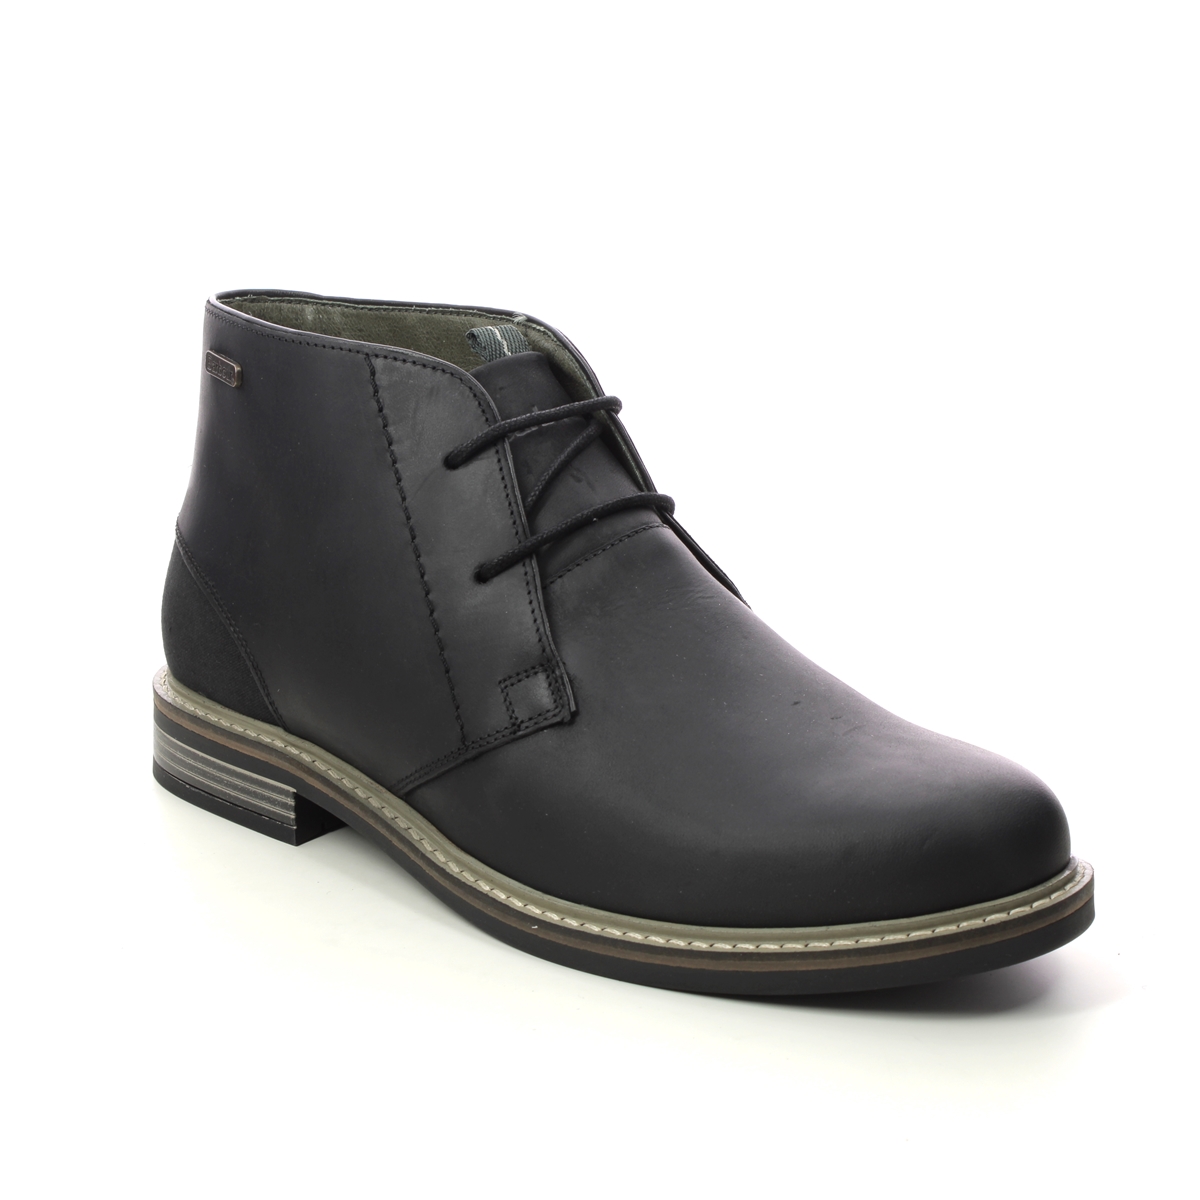 Barbour Redhead Black leather Mens Chukka Boots MFO0138-BK11 in a Plain Leather in Size 7